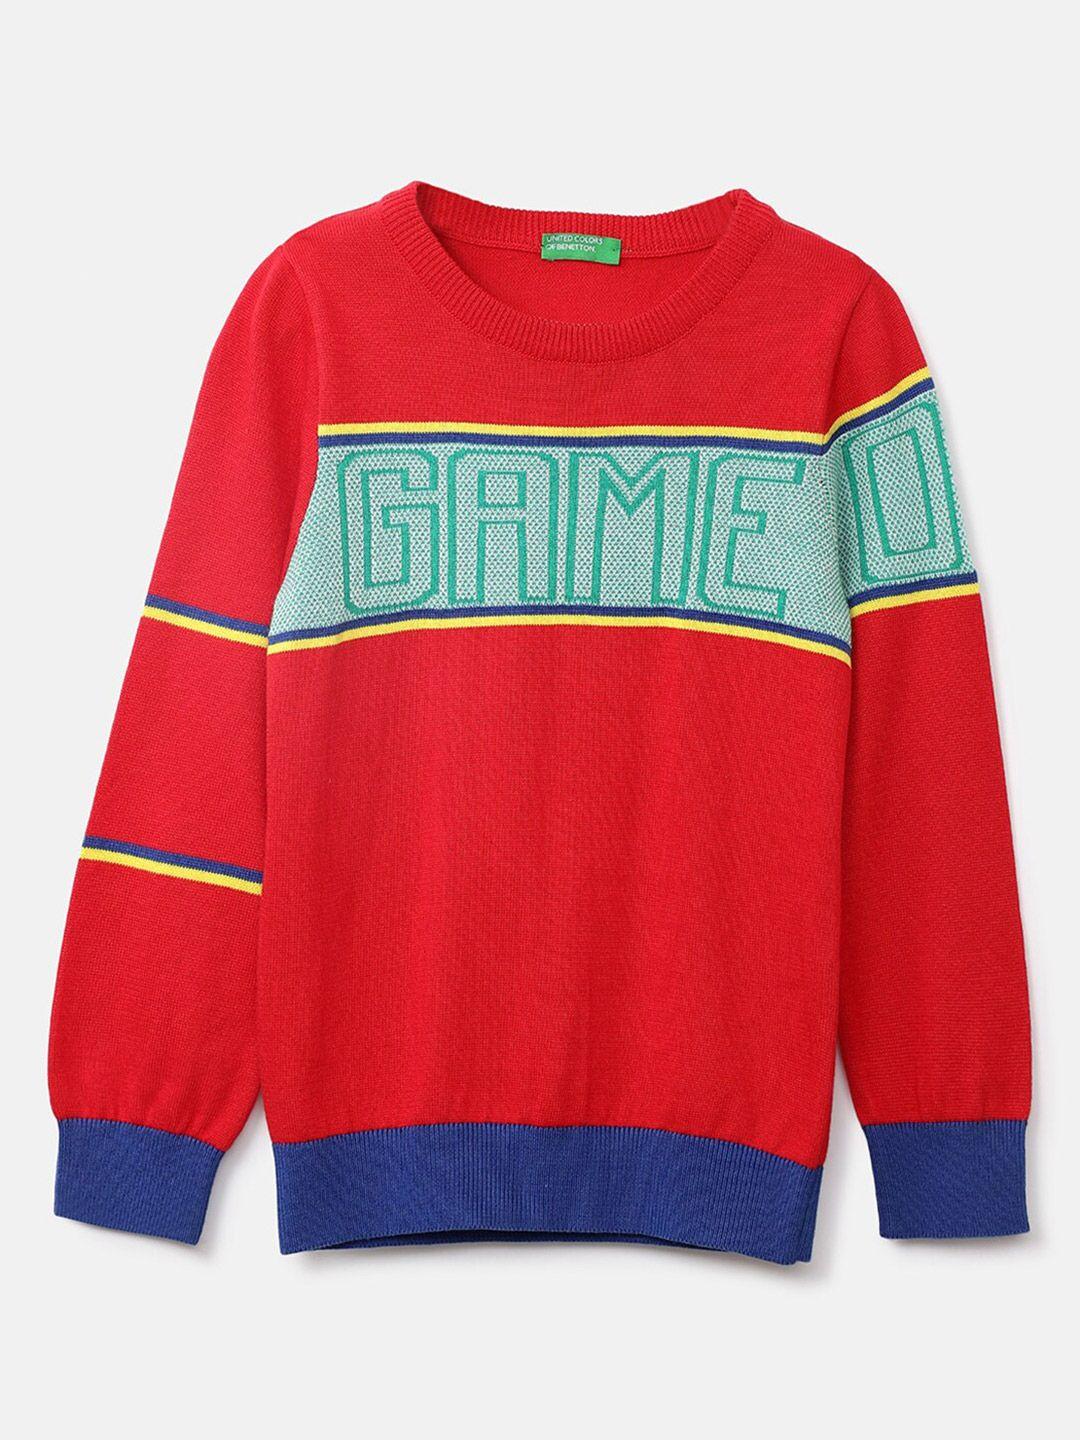 United Colors of Benetton Boys Red & Blue Typography Printed Pullover